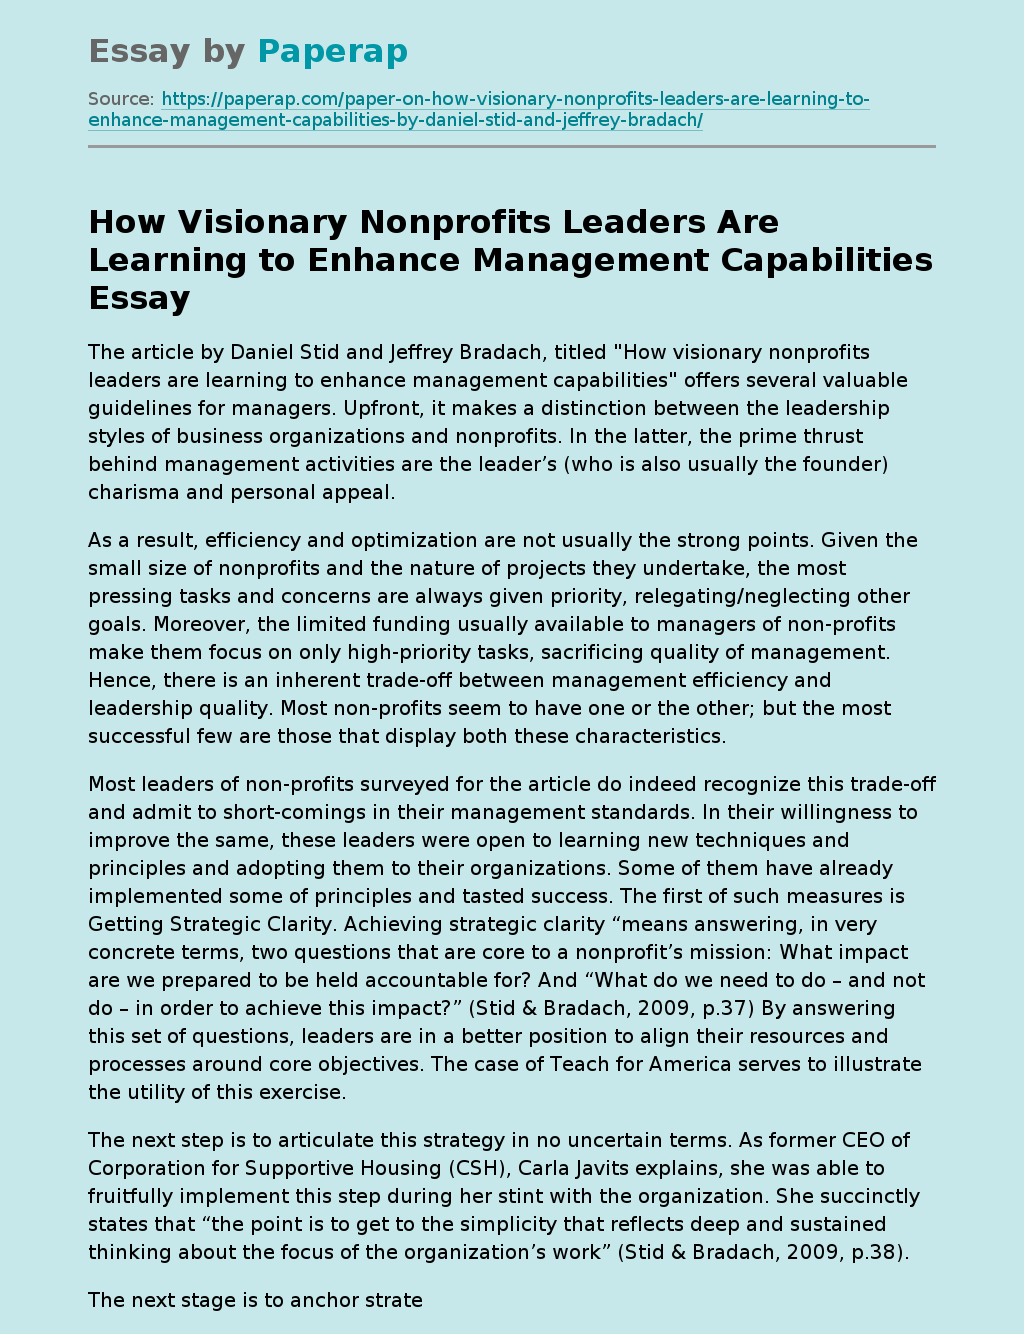 How Visionary Nonprofits Leaders Are Learning to Enhance Management Capabilities